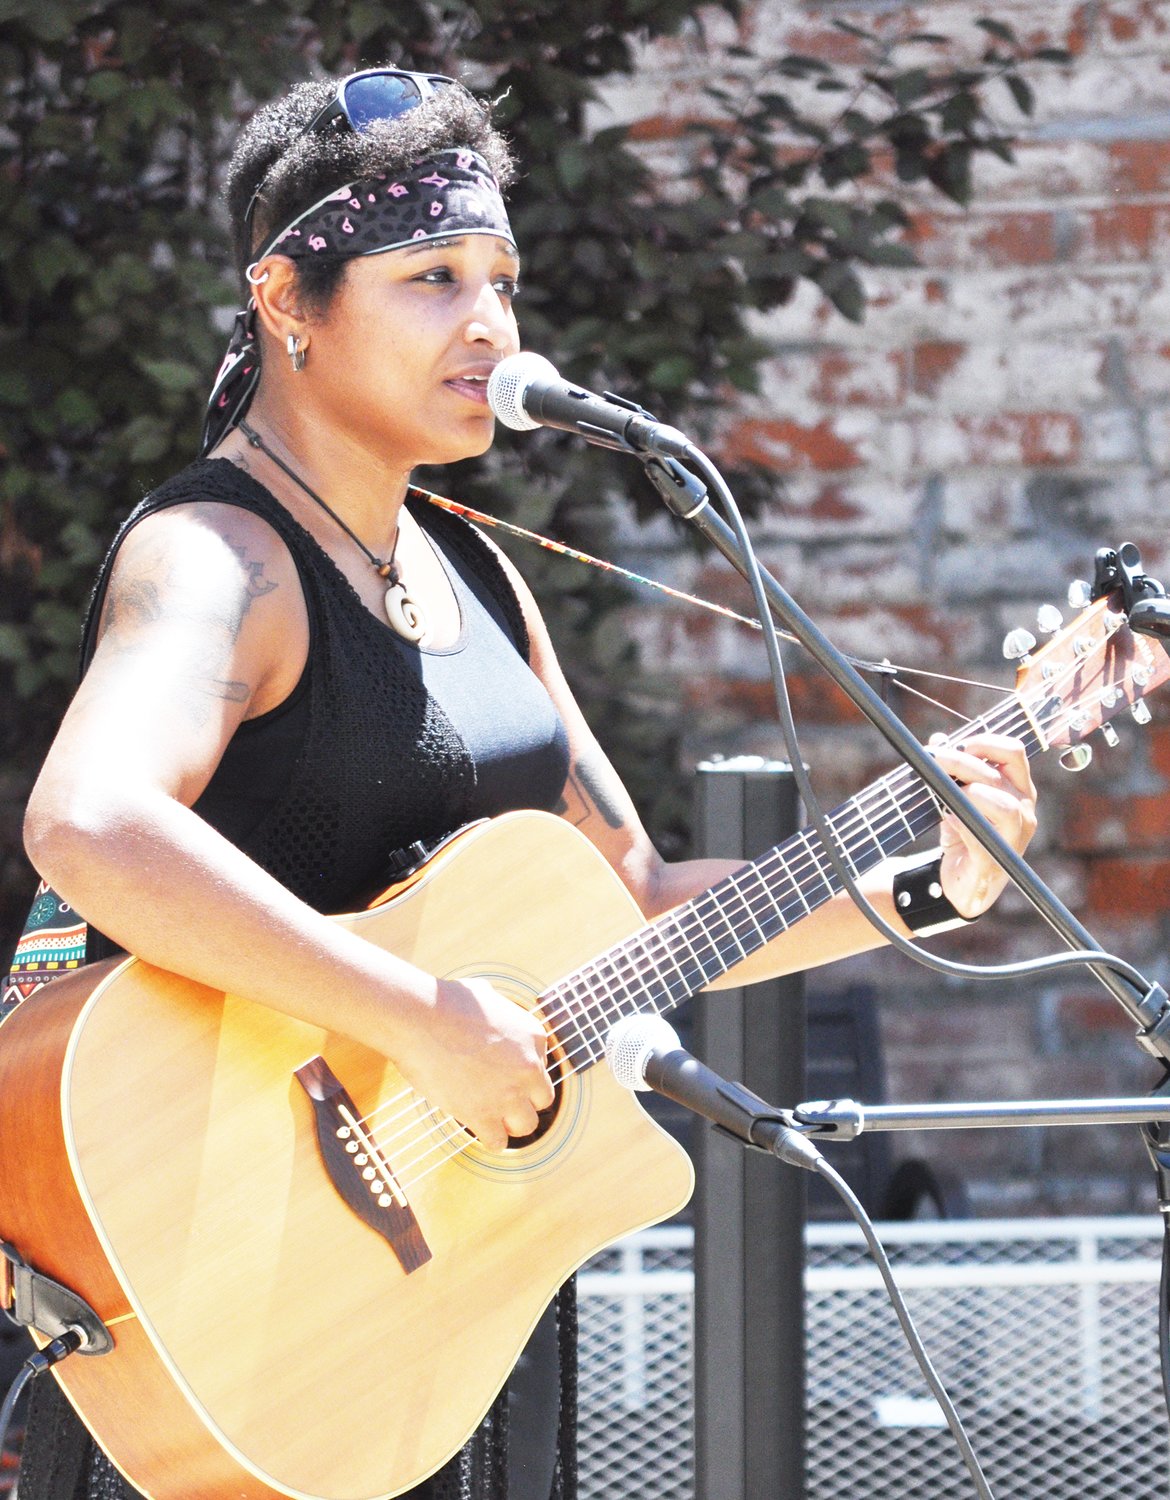 Claire "Sheeza" Tchoula performs during Lunch on the Plaza 2.0 at Marie Canine Plaza Friday.